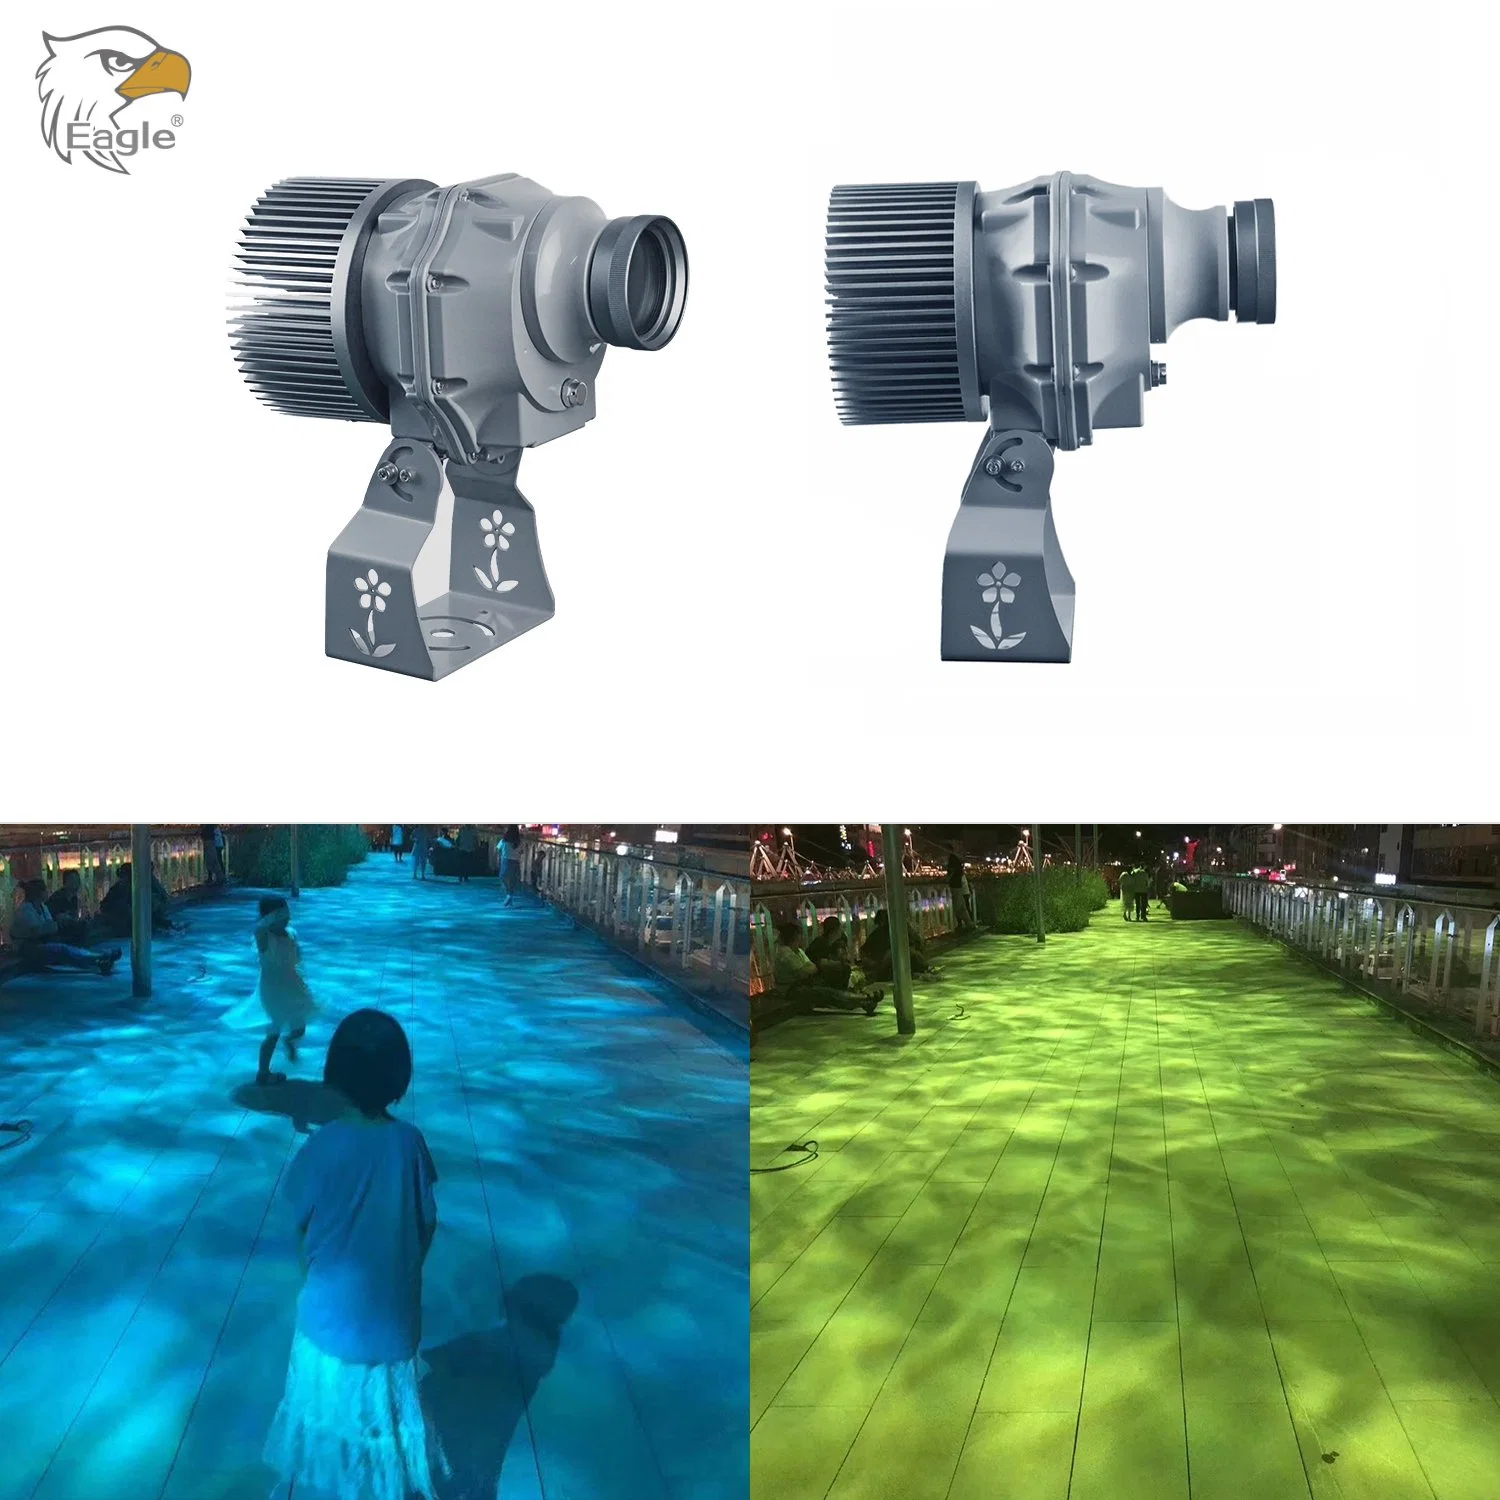 LED 60W Water Ripple Effect Gobo Projector for Outdoor Street Park Projeciton Lighting IP65